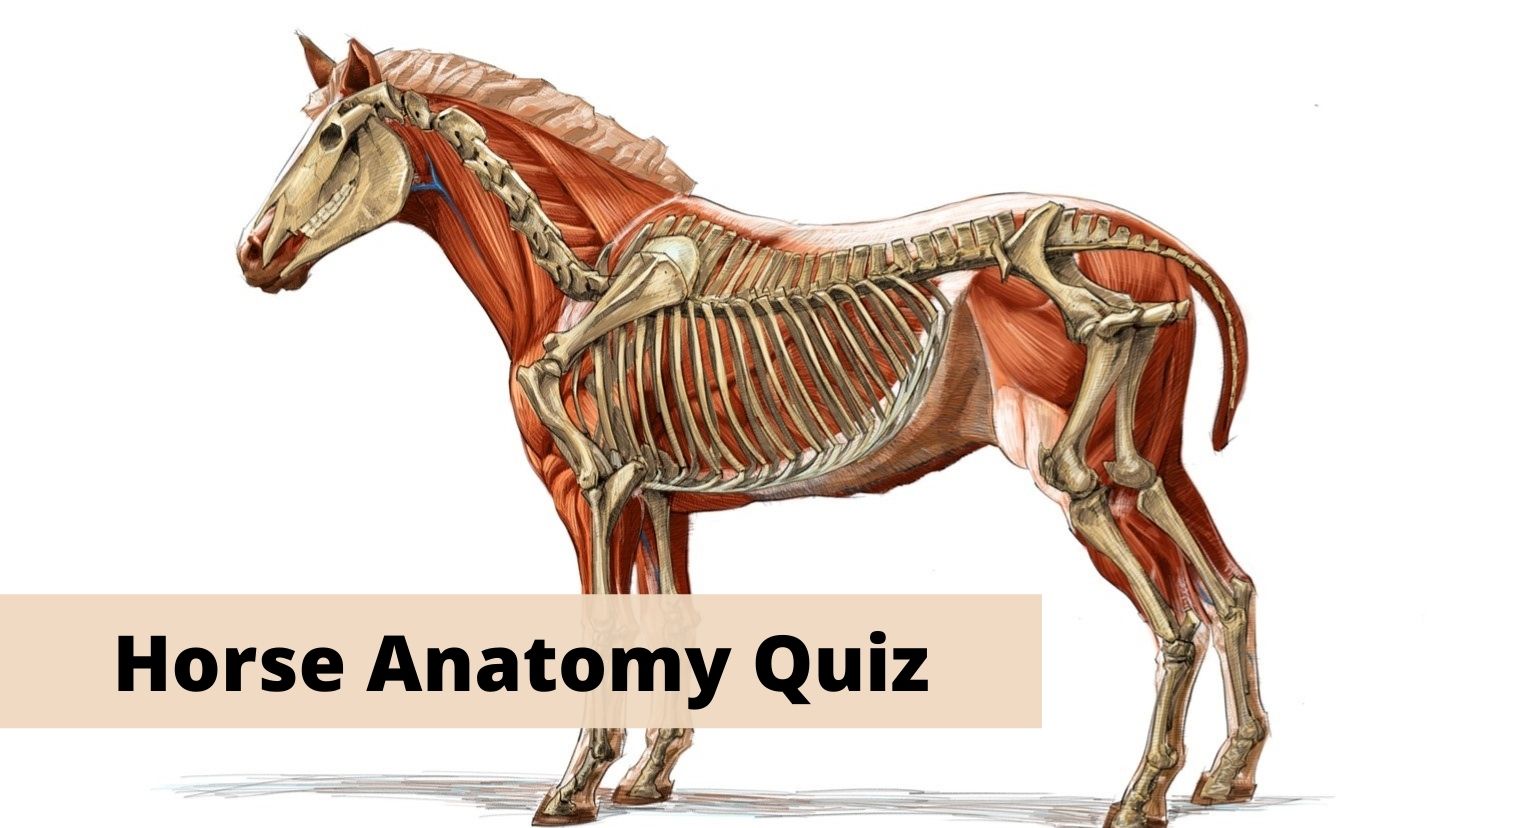 Horse Anatomy and skeleton quiz questions